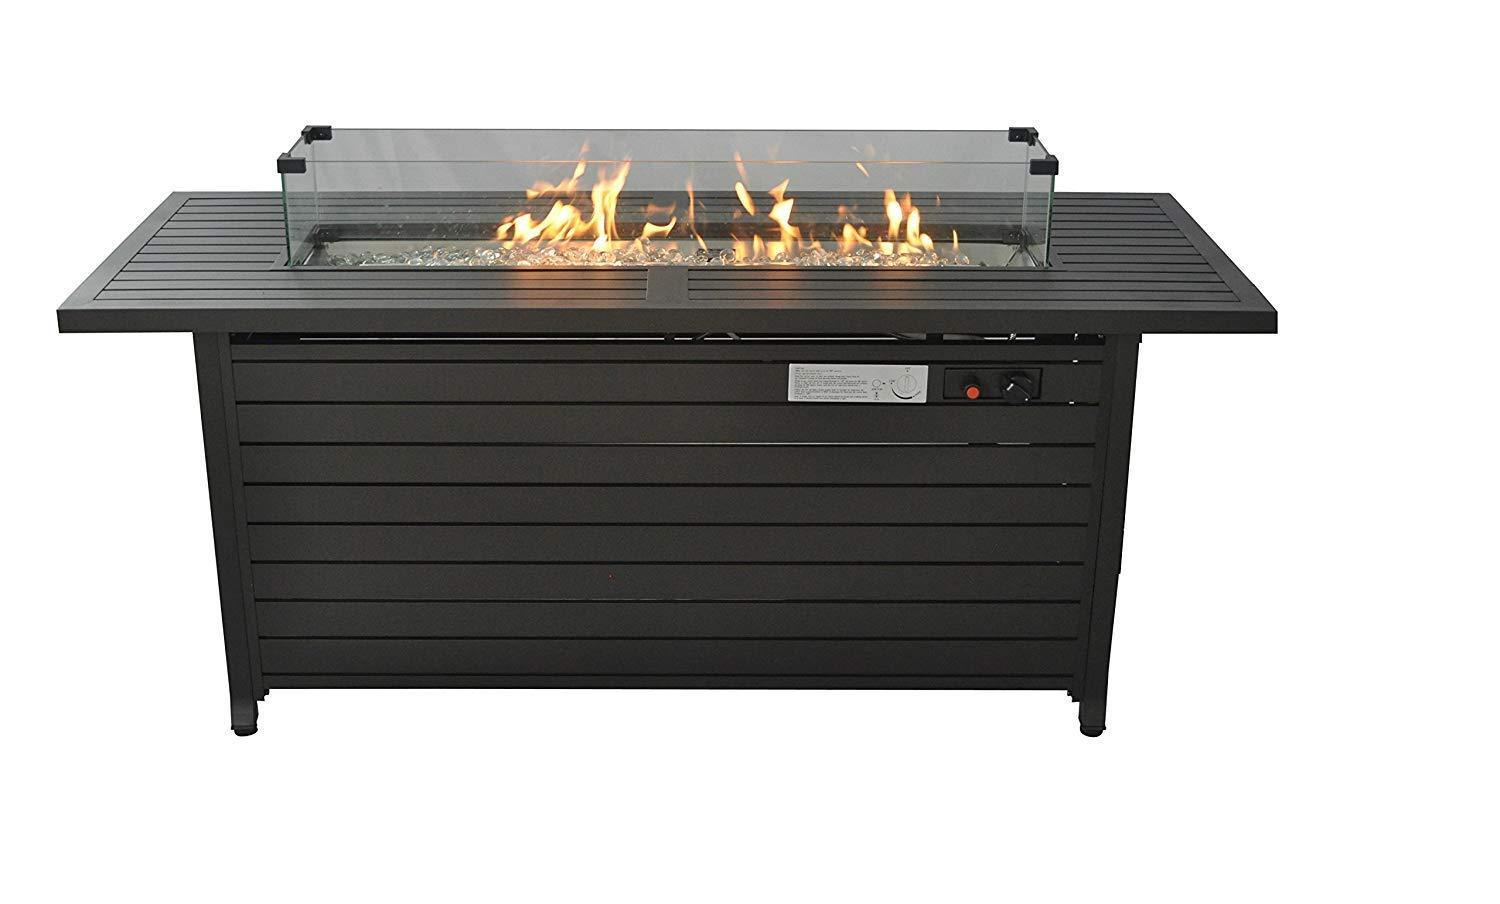 57in Propane Fire Pit Table 50000BTU with Lid, Wind Guard,Dust Cover & ETL Certification